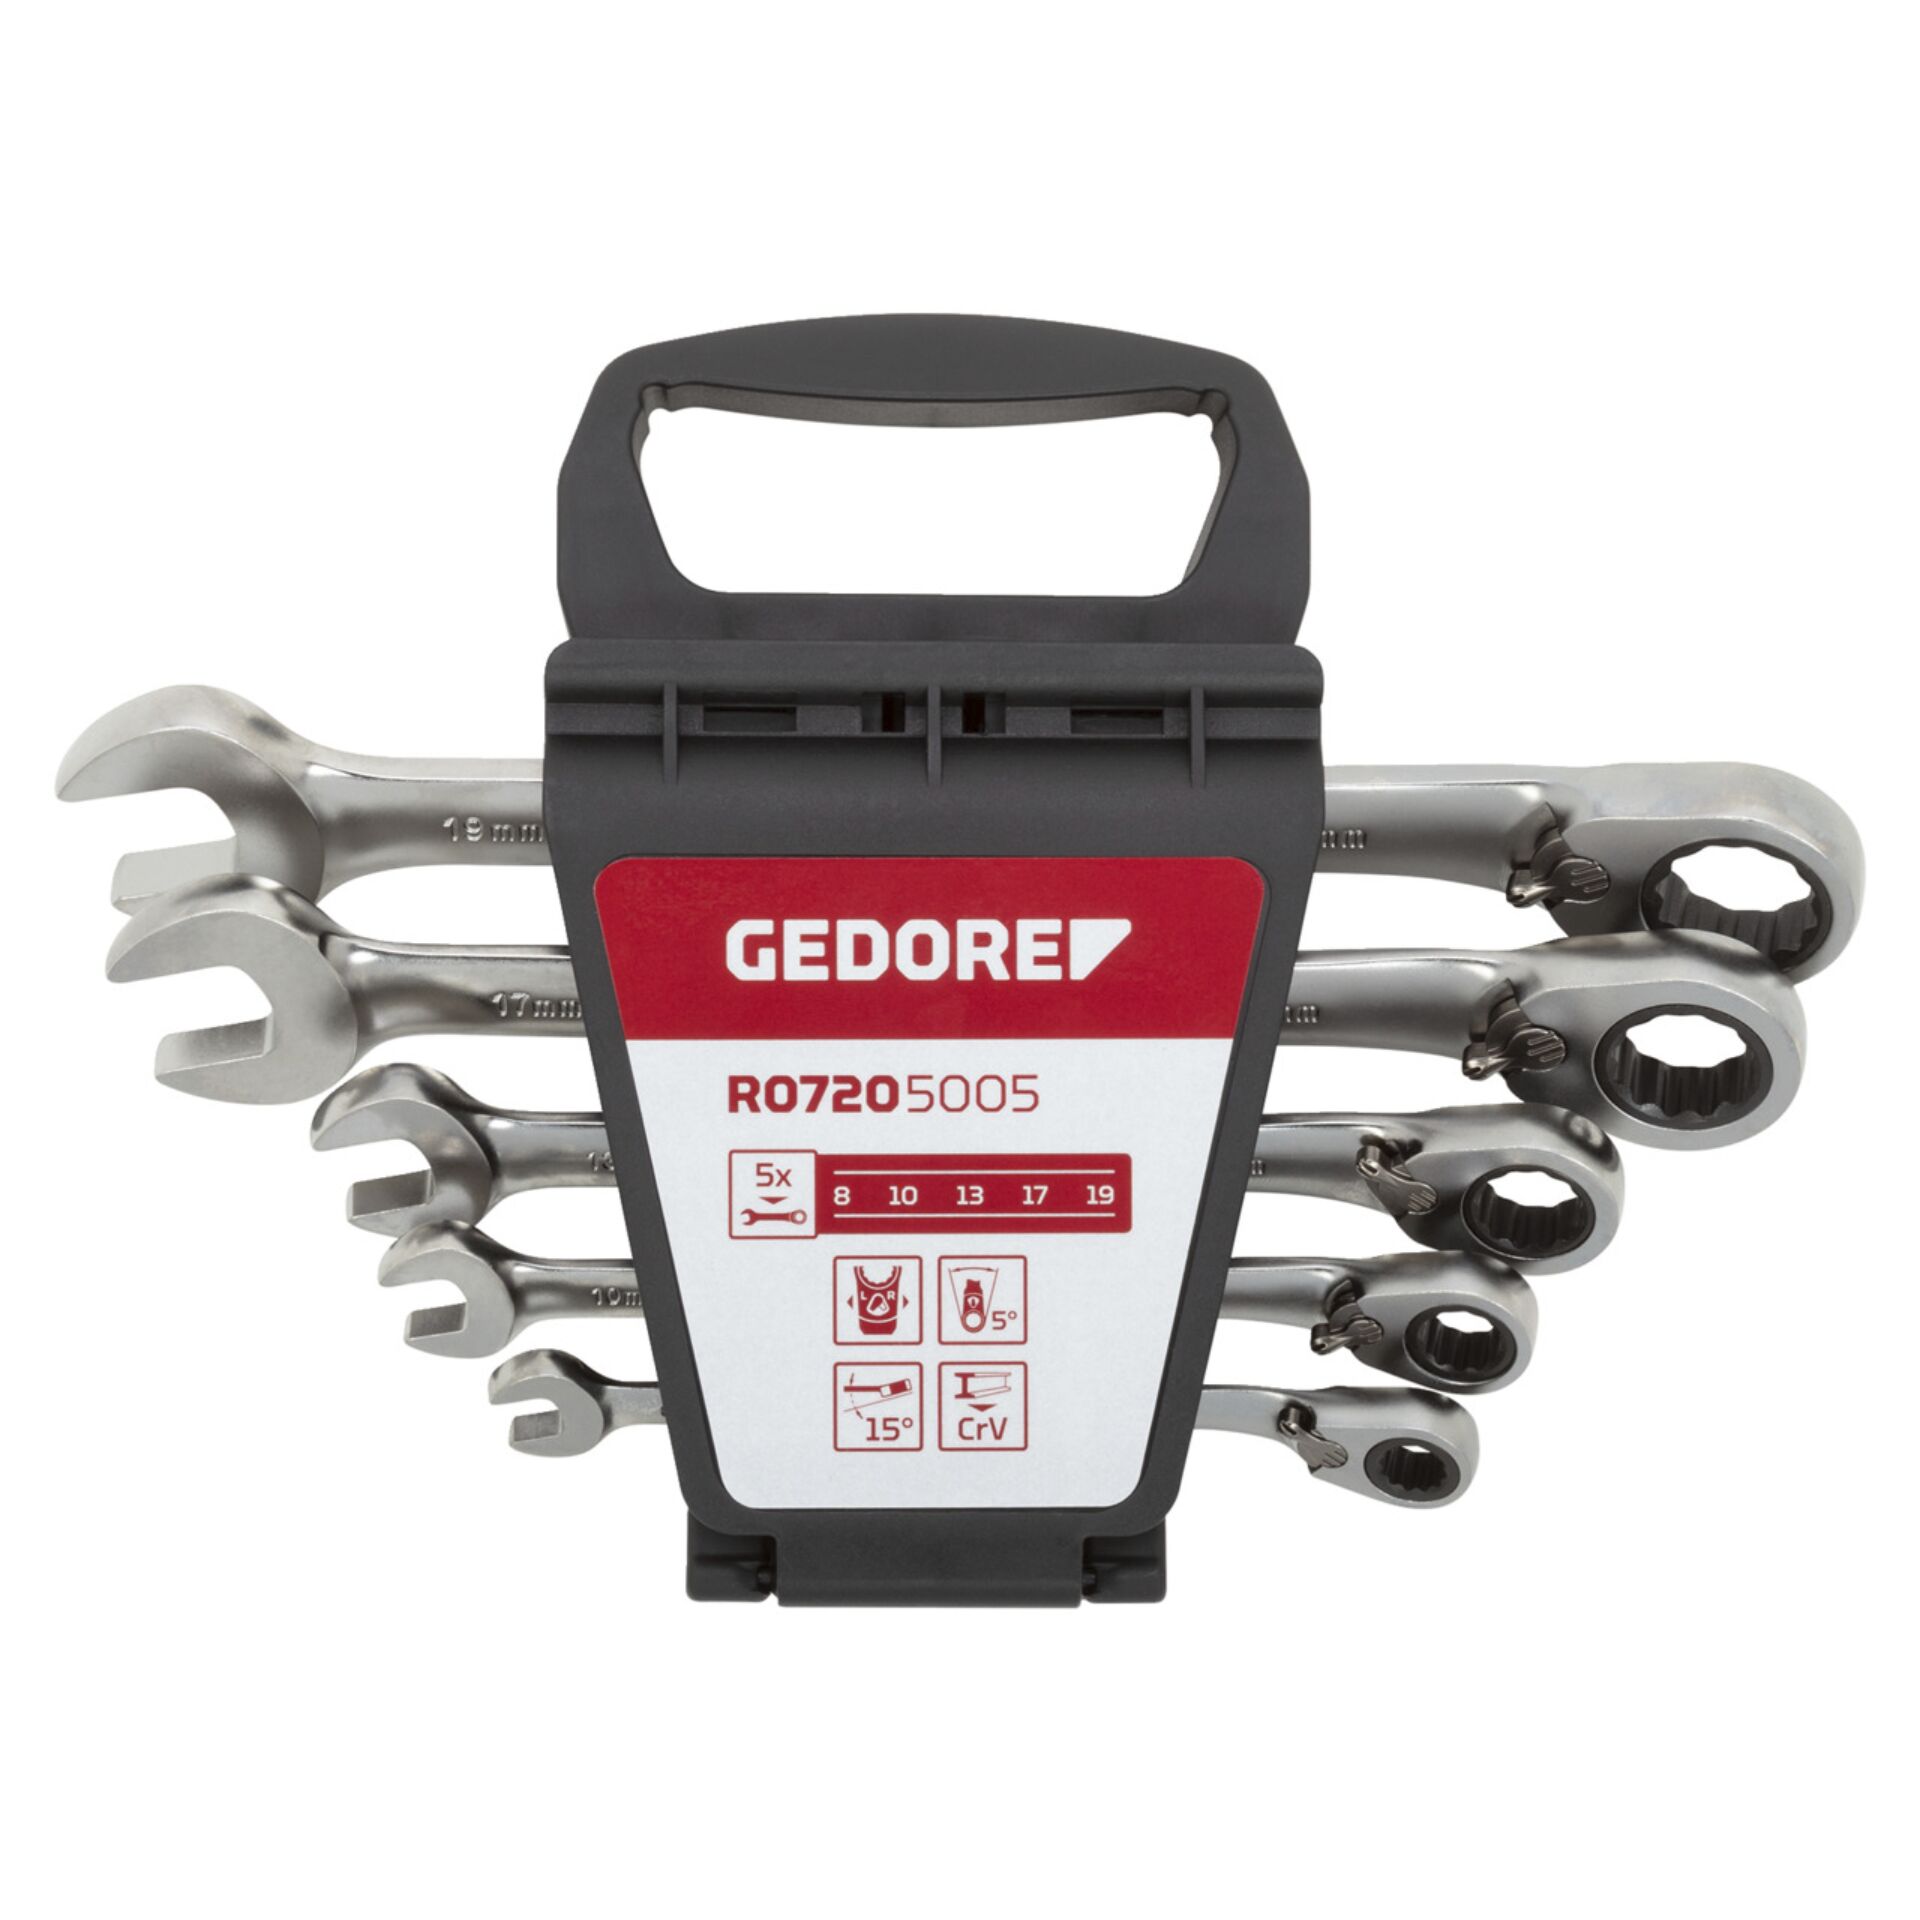 GEDORE red Combination Ratchet open-end Spanner Set  5-piece